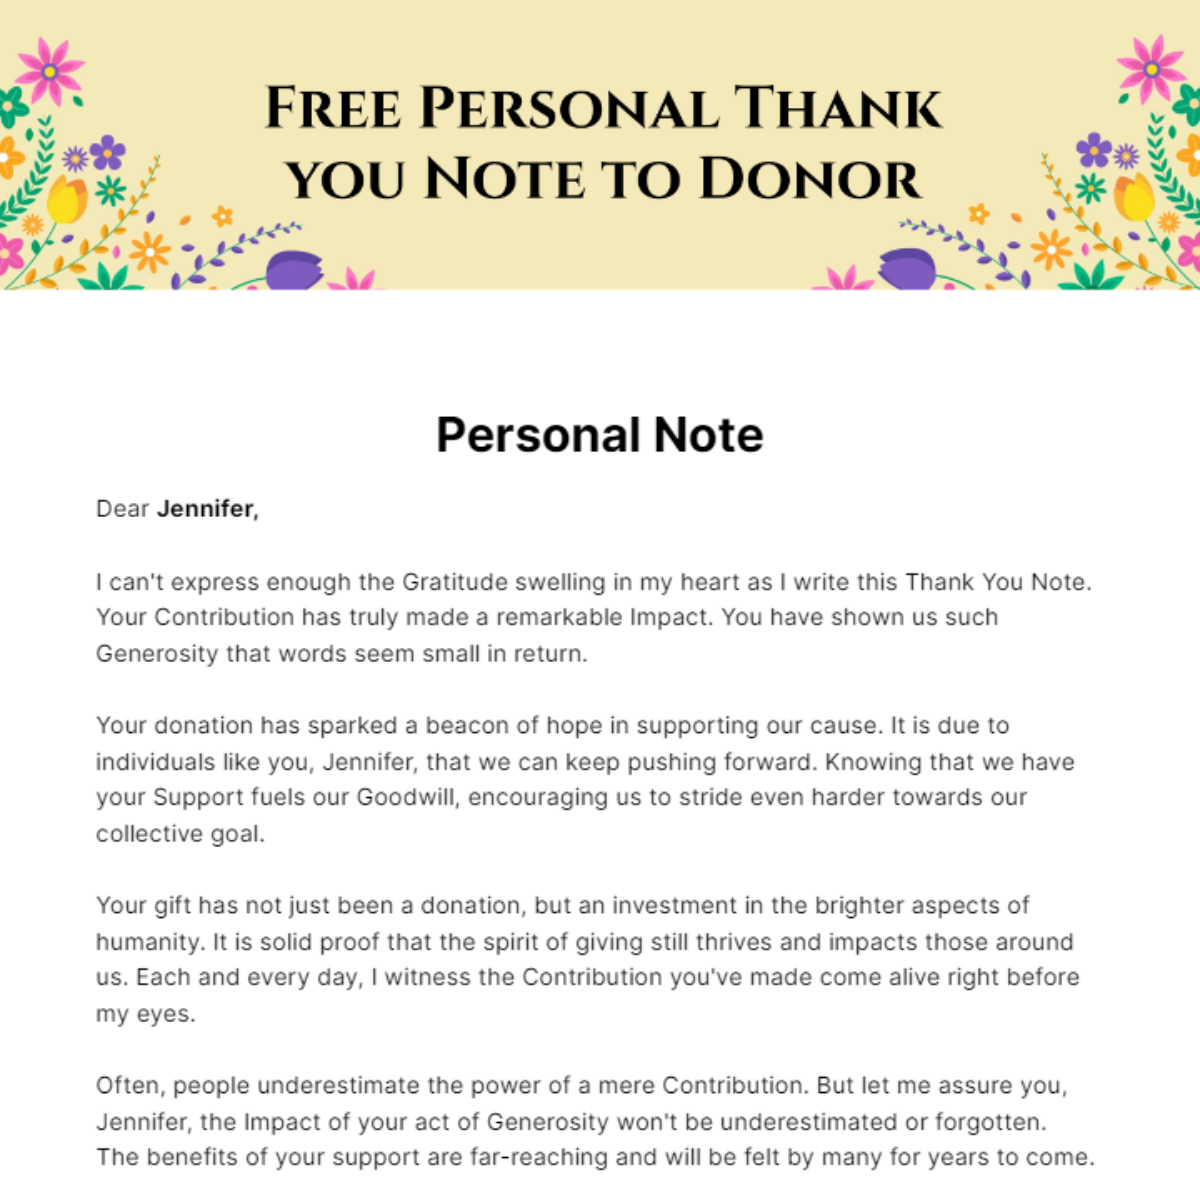 Free Personal Thank you Note to Donor Template